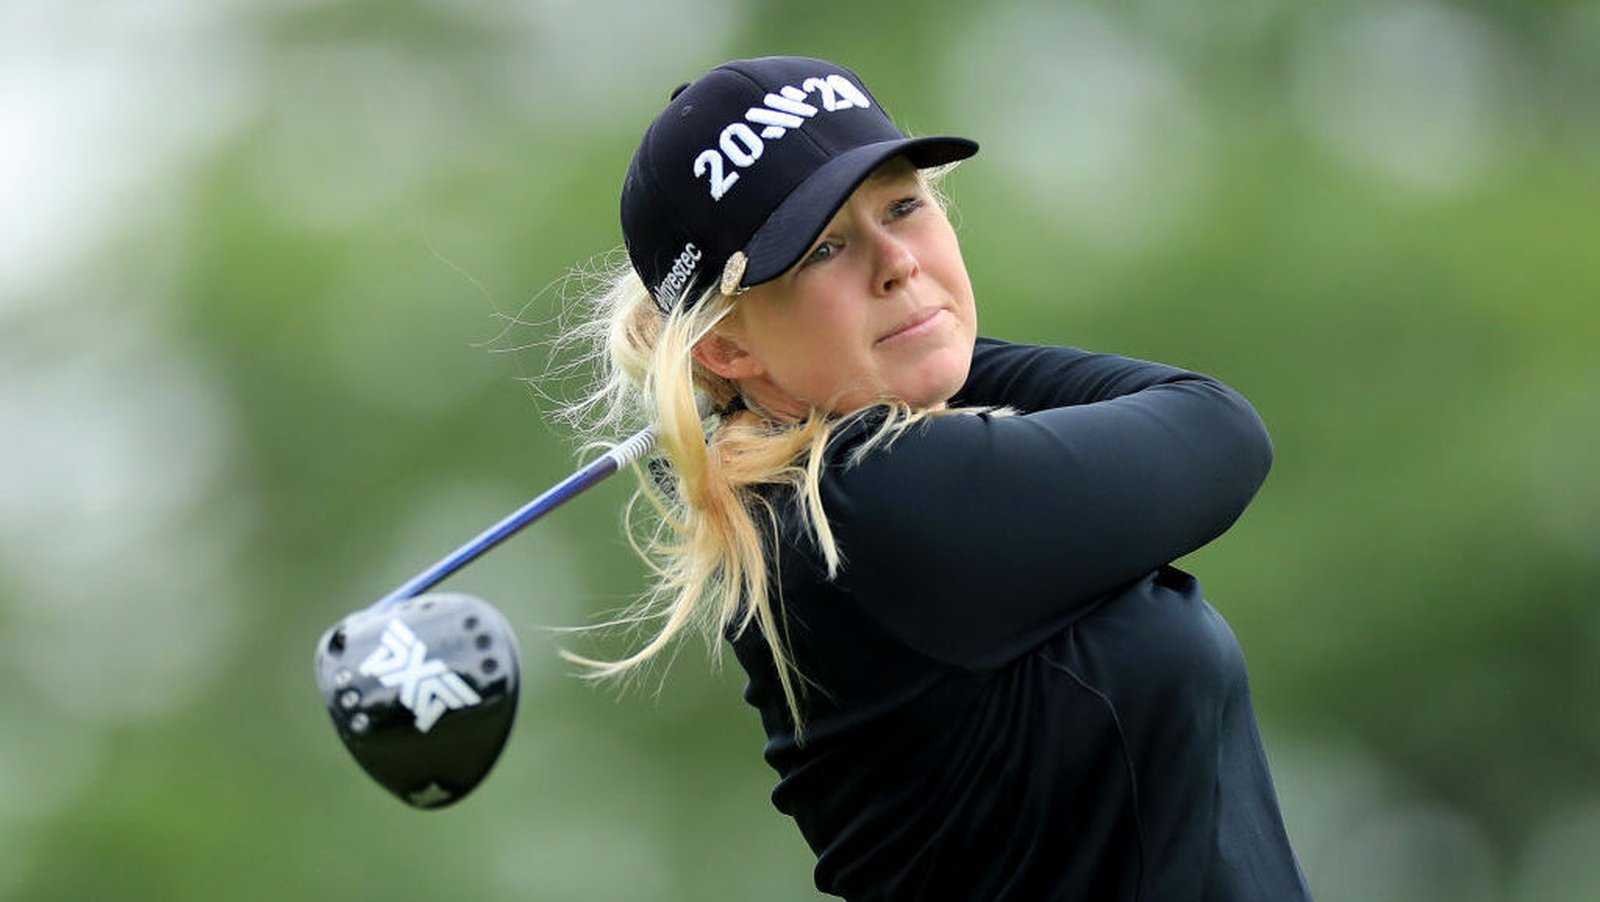 Meadow shoots up the leaderboard at LPGA Tour event